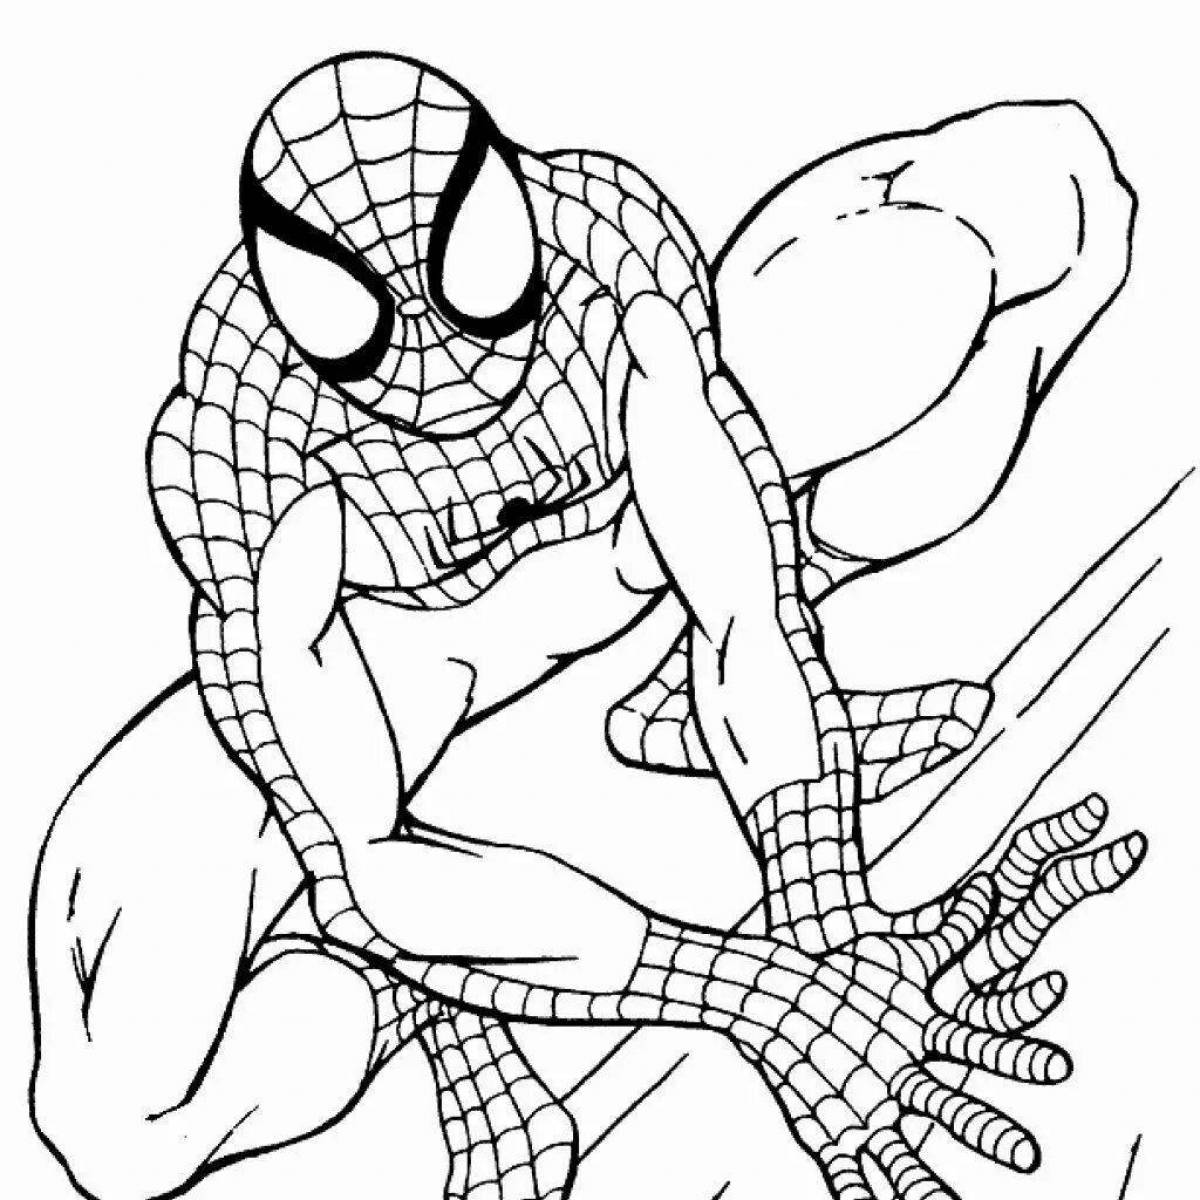 Adorable zombie spiderman coloring page